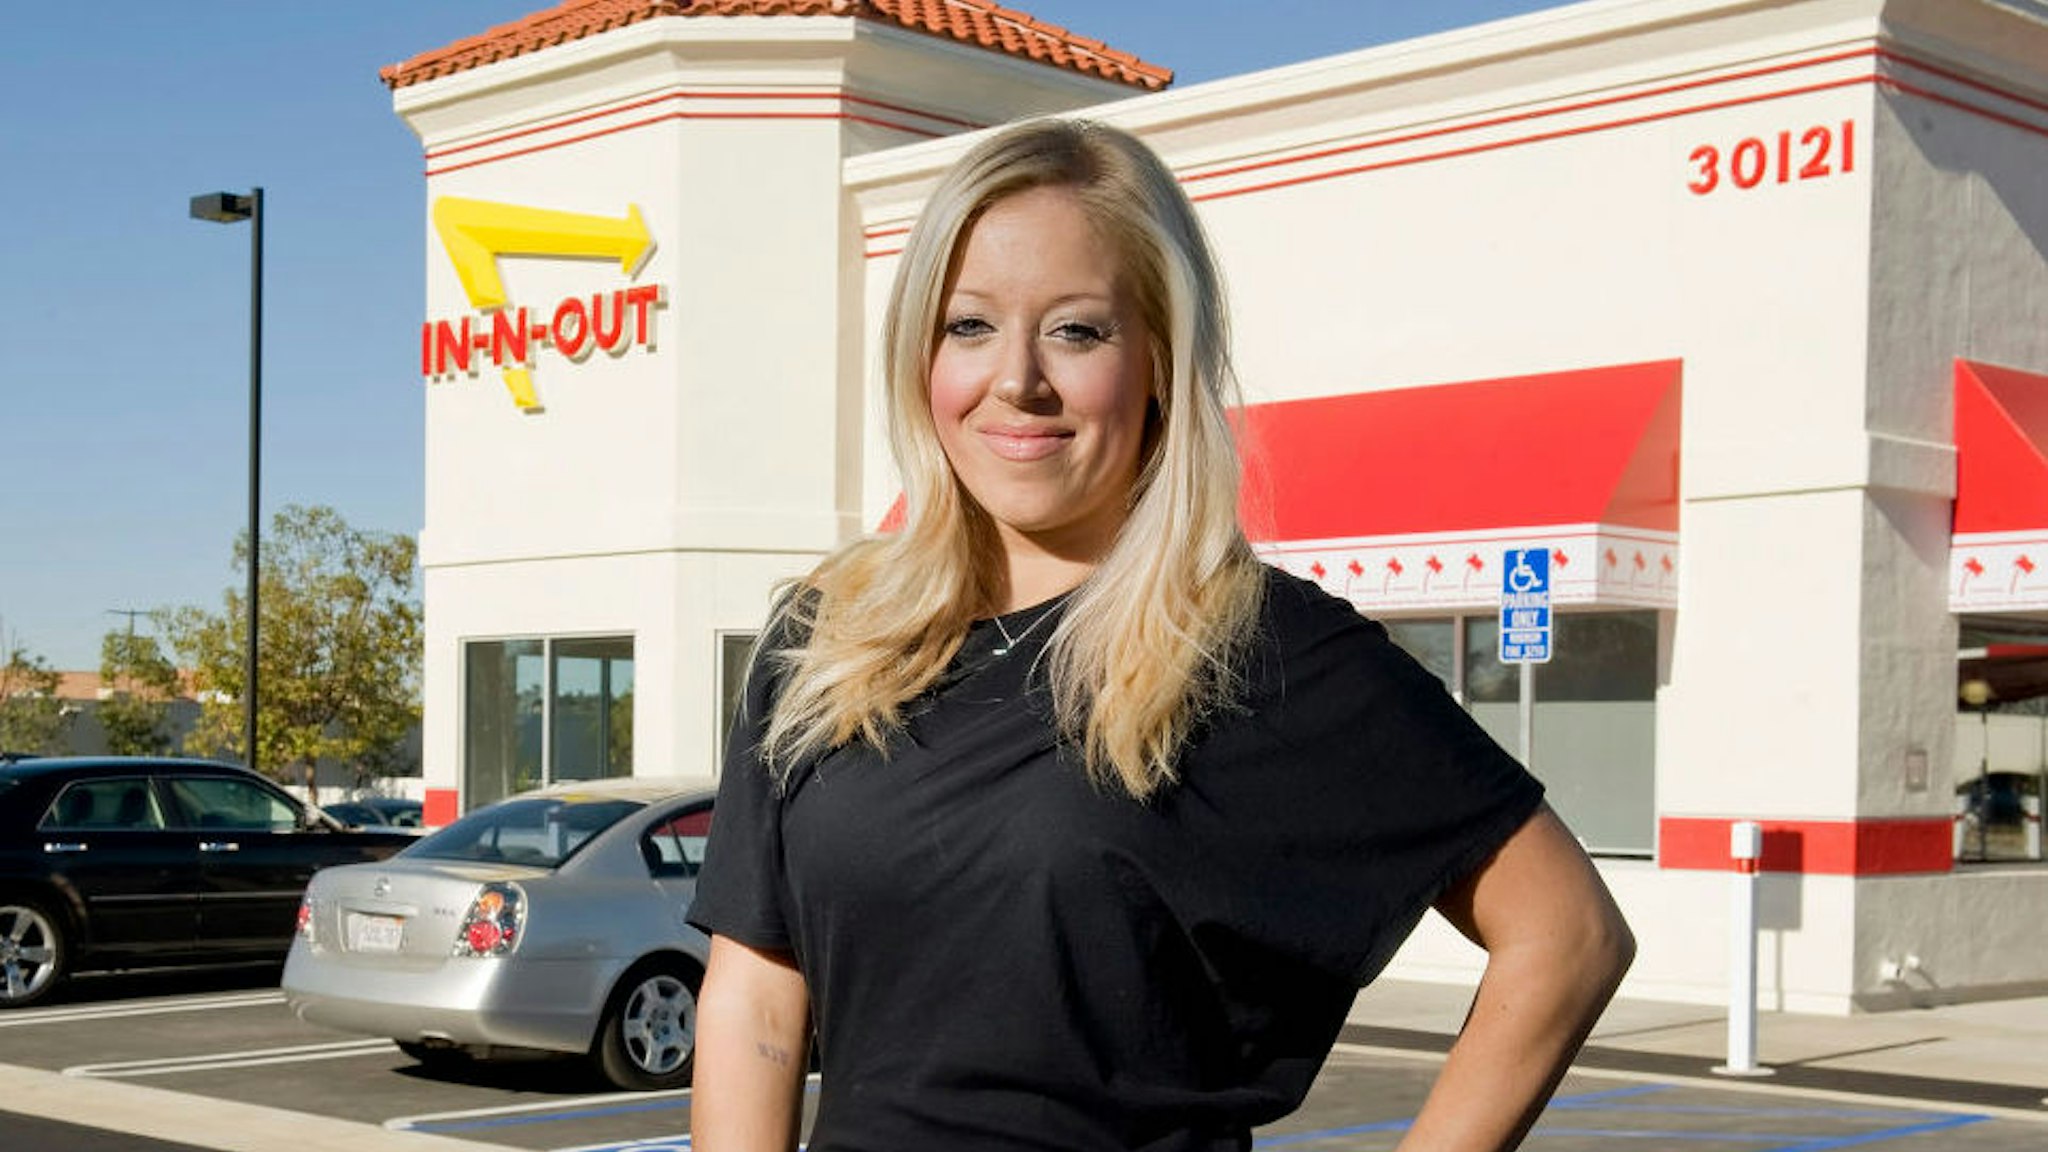 In-n-Out Burger CEO Lynsi Torres shown outside the new restaurant in Rancho Santa Margarita, Calif. on Wednesday, February 13, 2013.